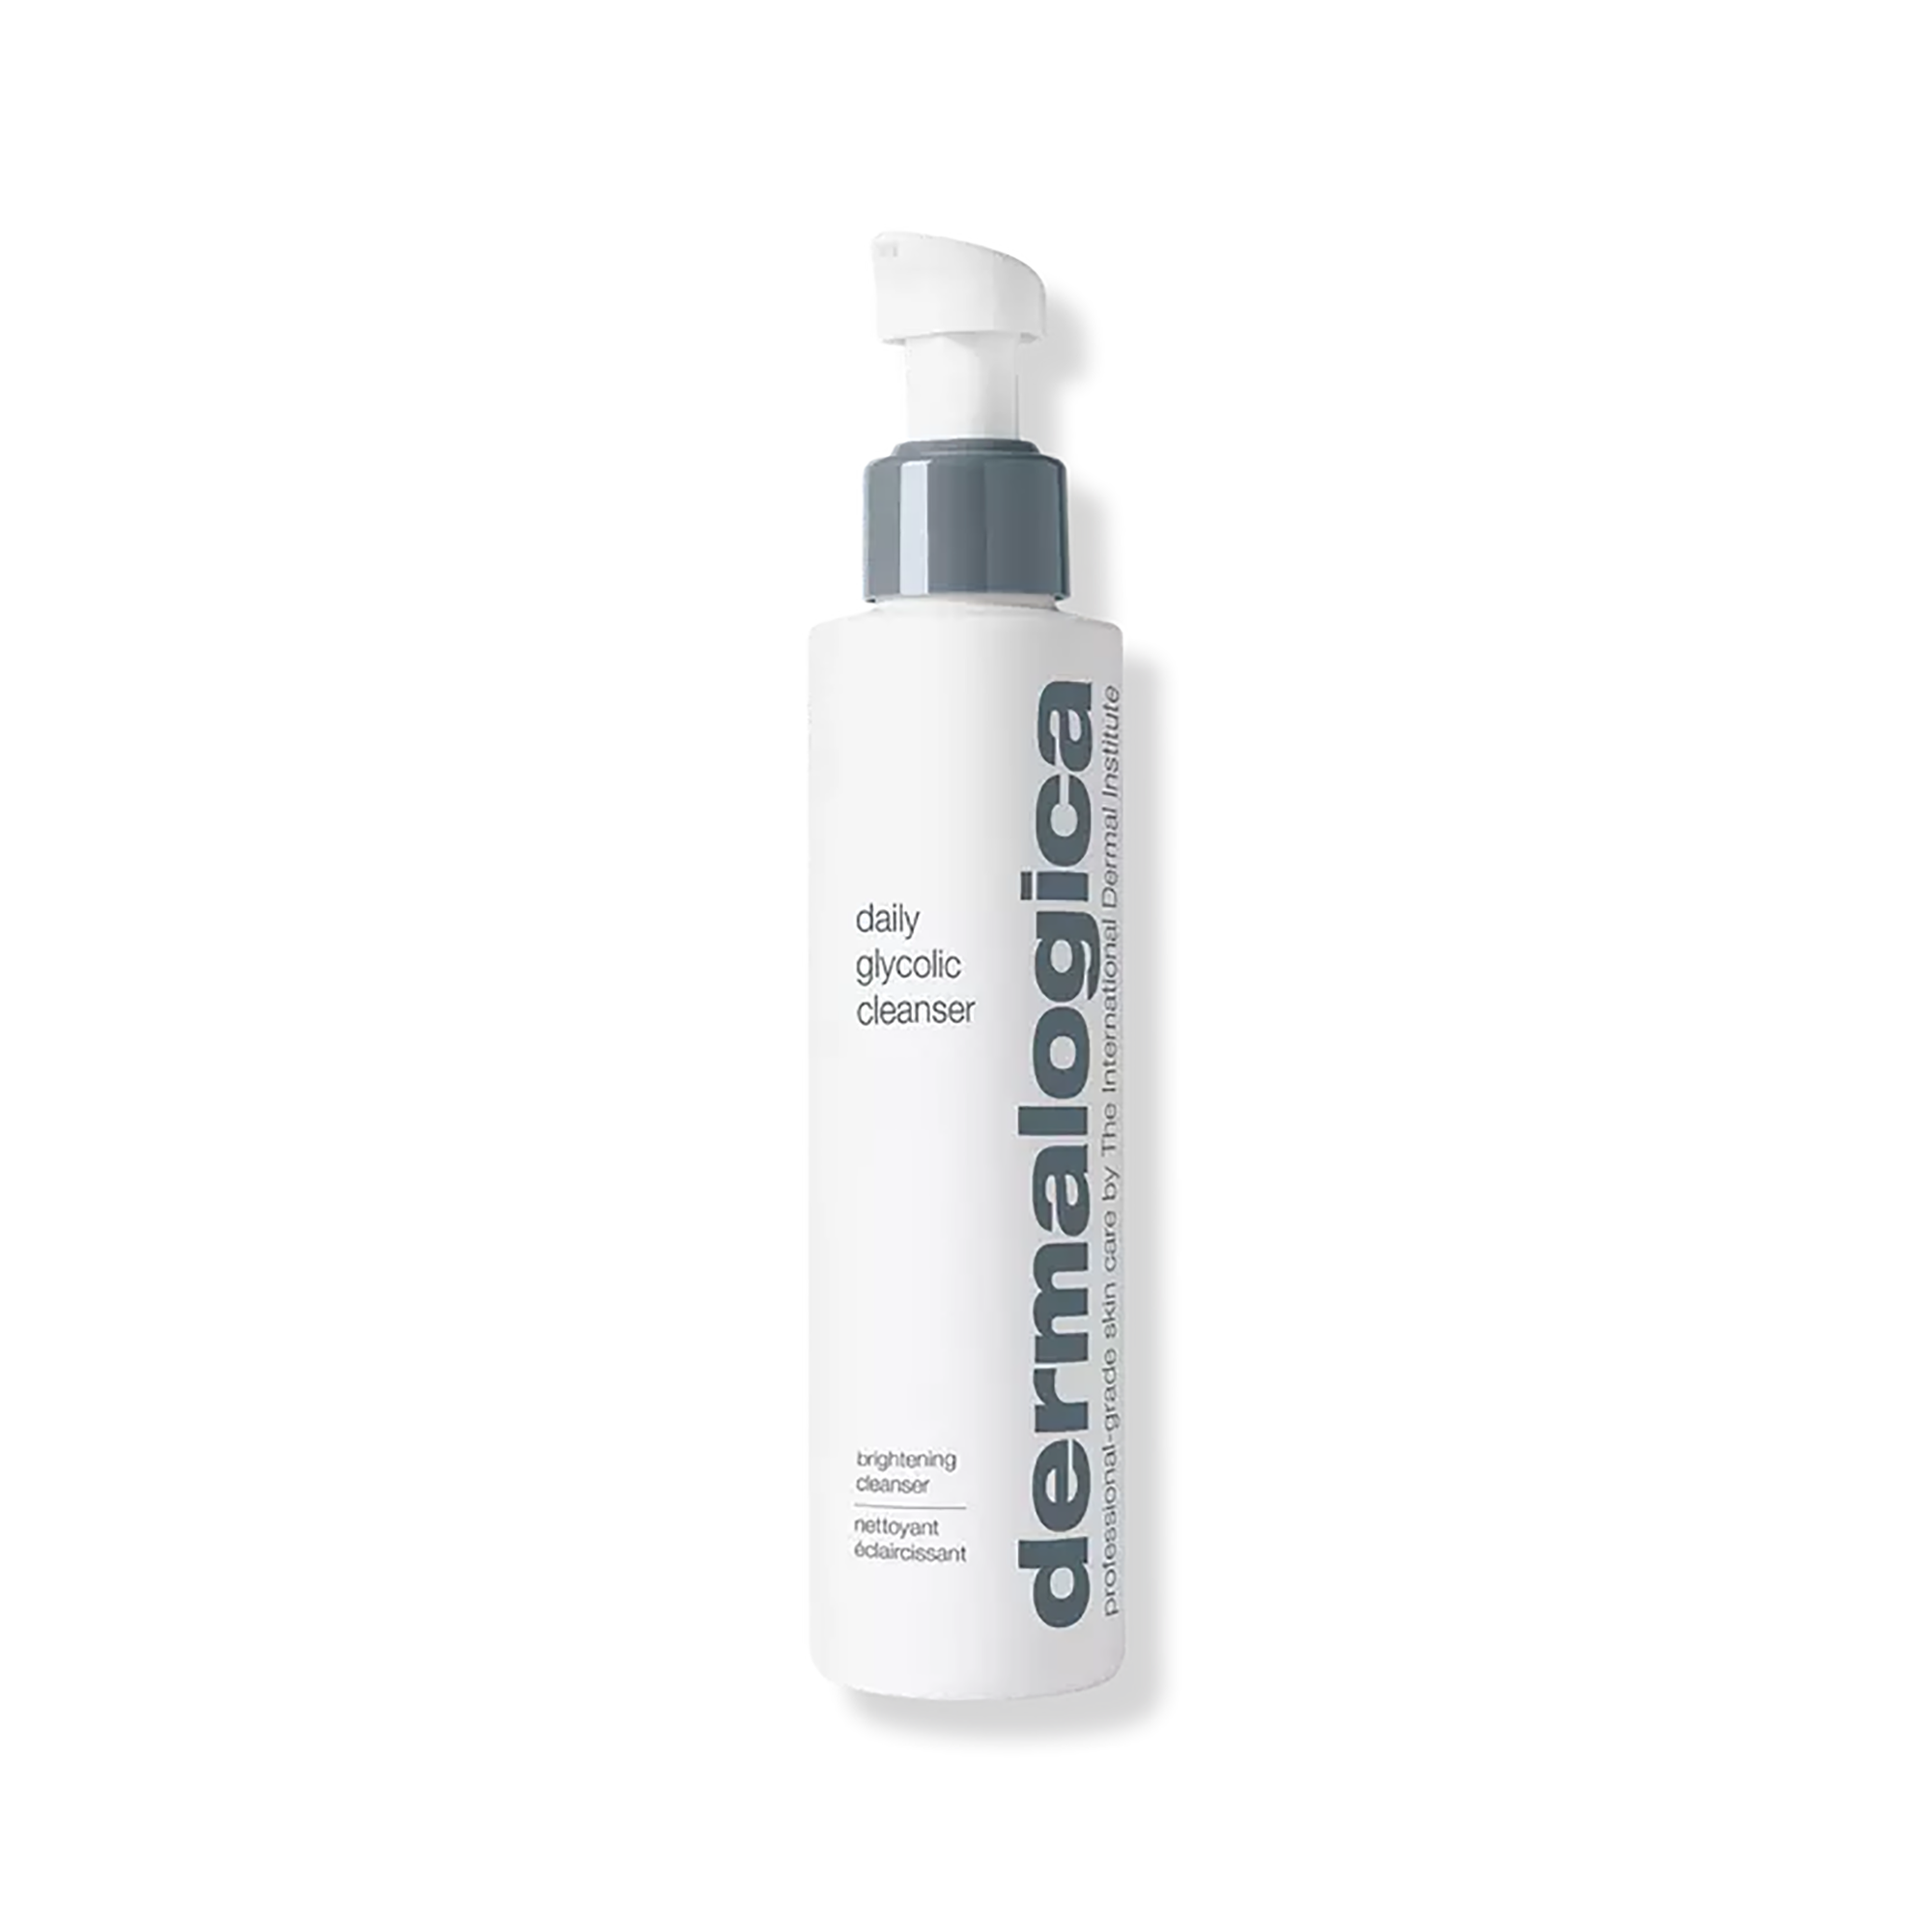 Dermalogica Daily Glycolic Cleanser / 5.1 oz